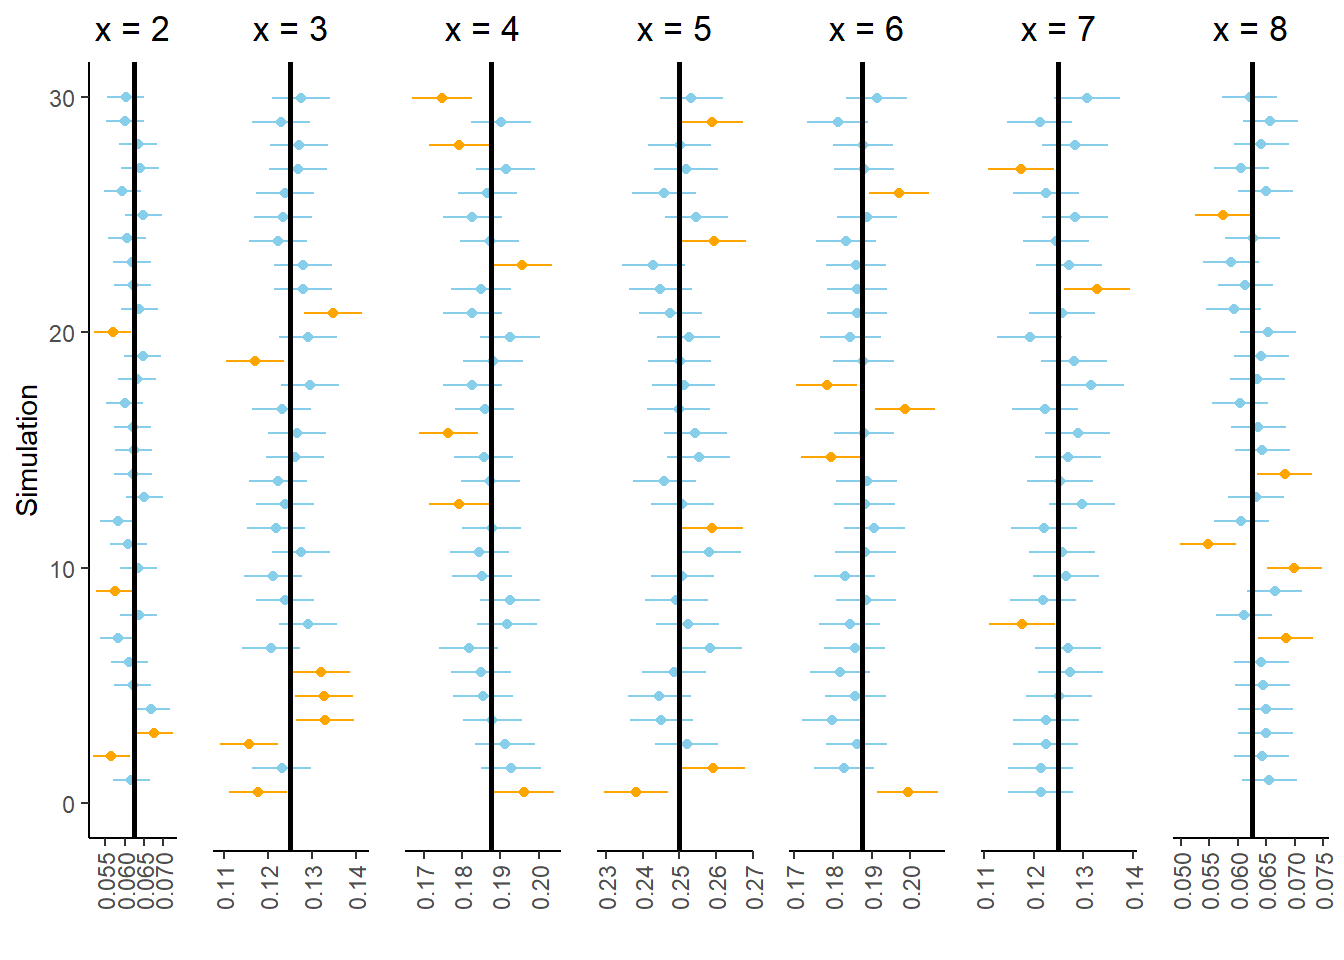 Subset of 30 simulations from Figure 2.22. In each of these simulations, at least one 95% confidence interval does not contain the respective true probability.